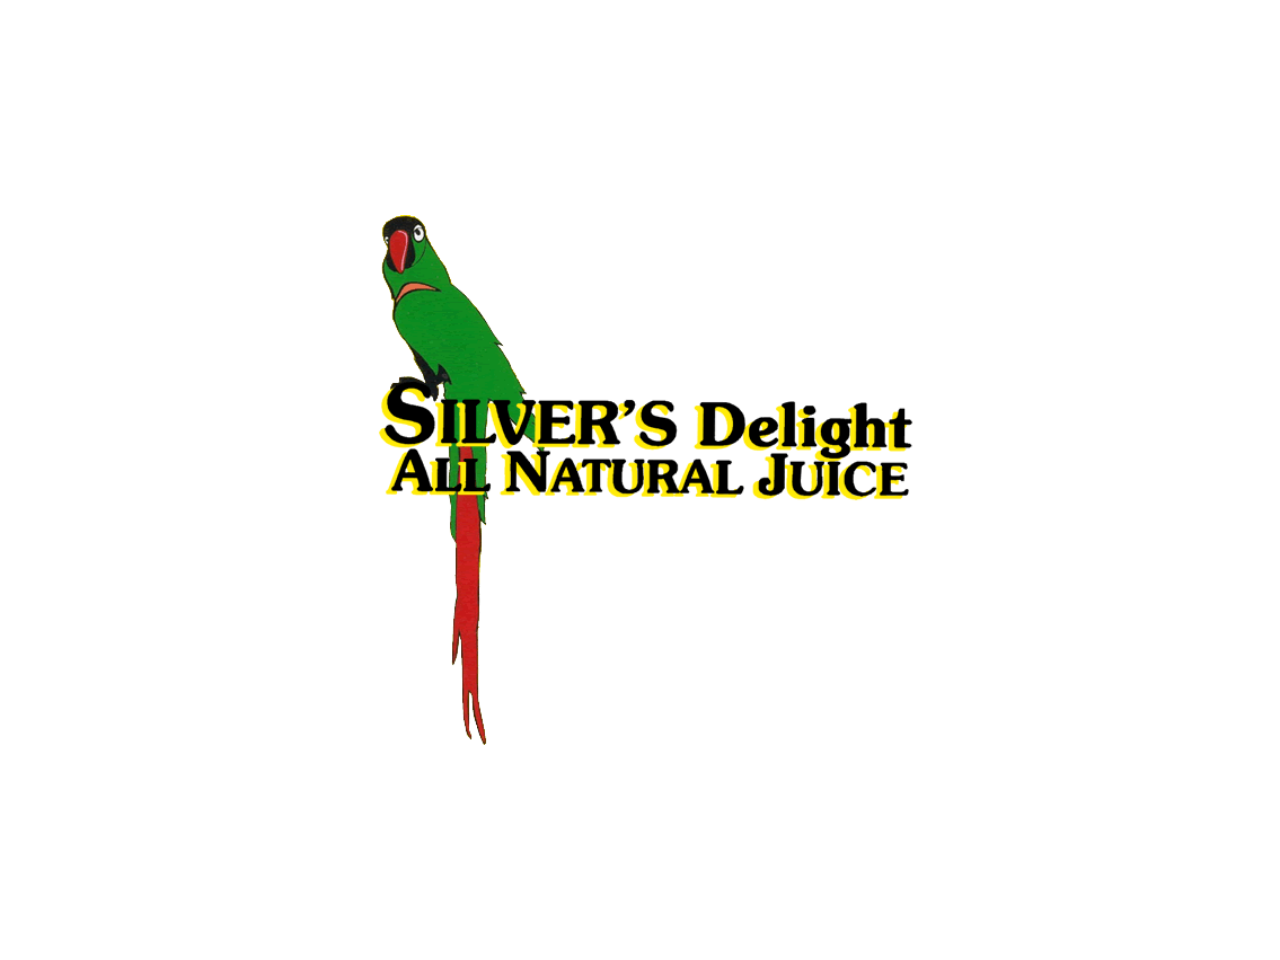 Silvers Delight All Natural Juice